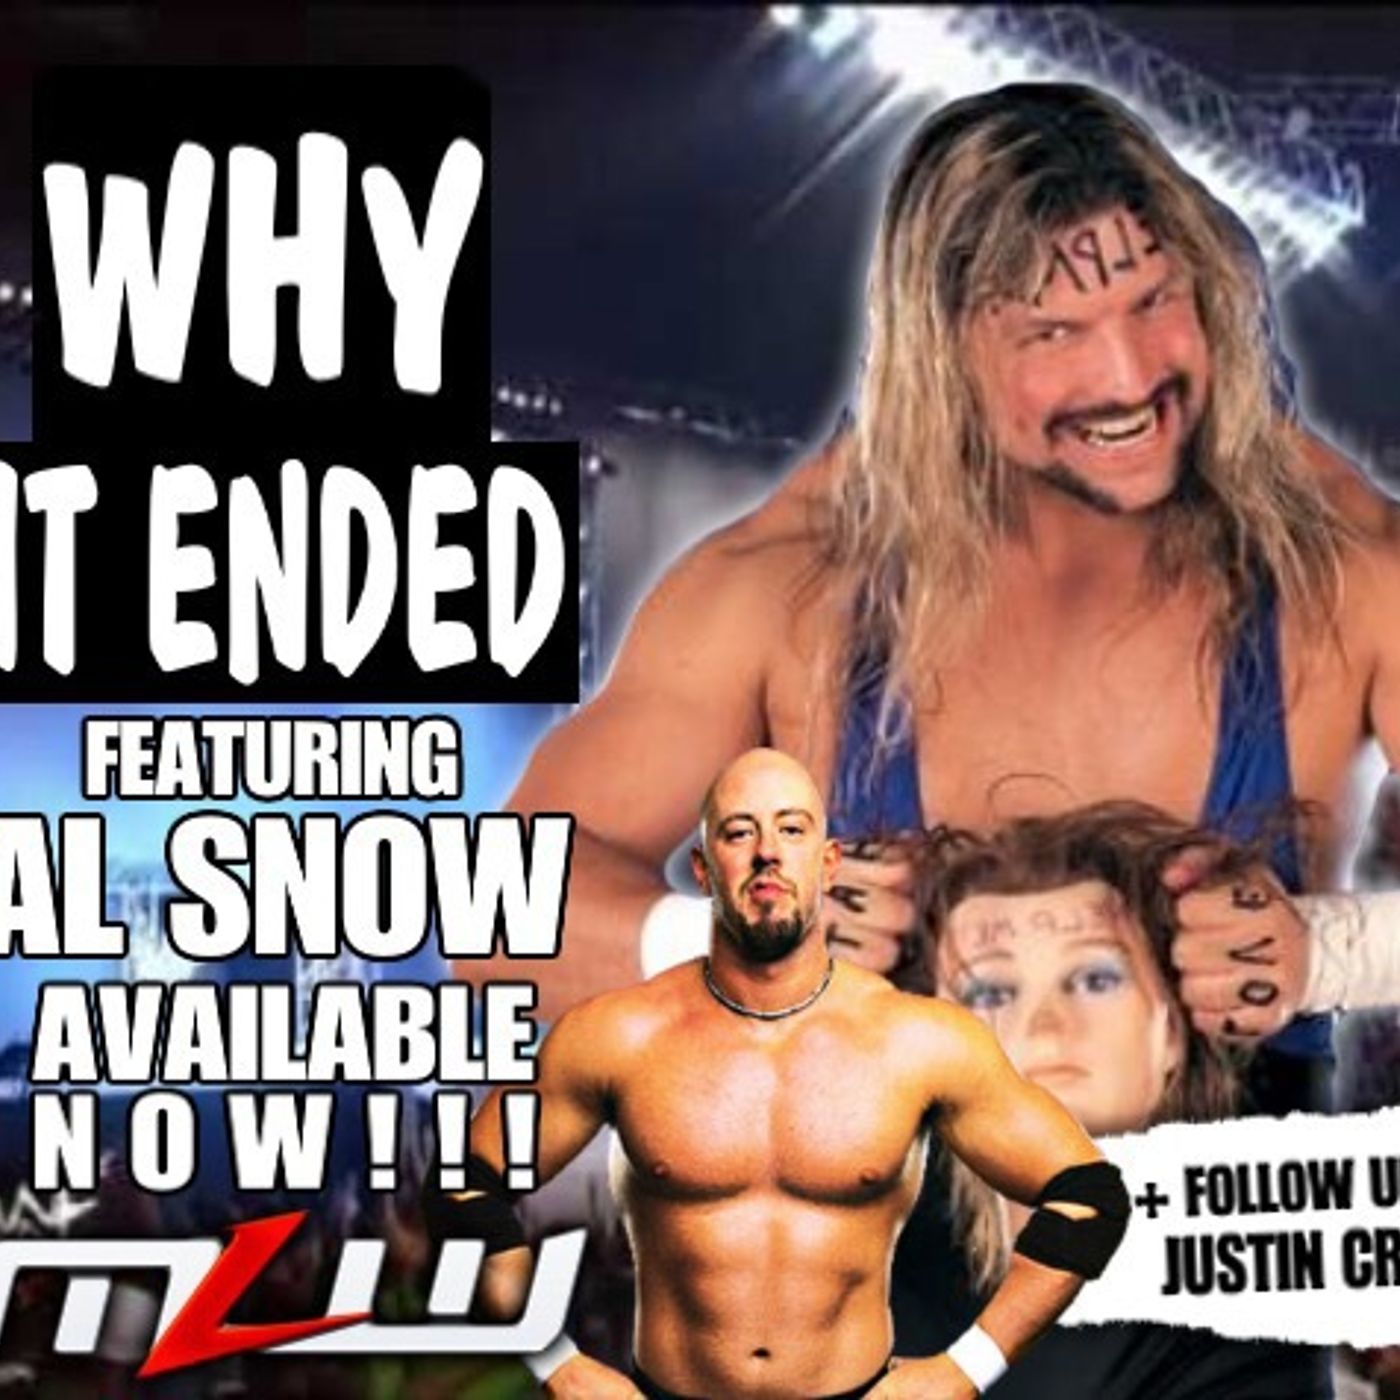 Al Snow and a follow up with Justin Credible